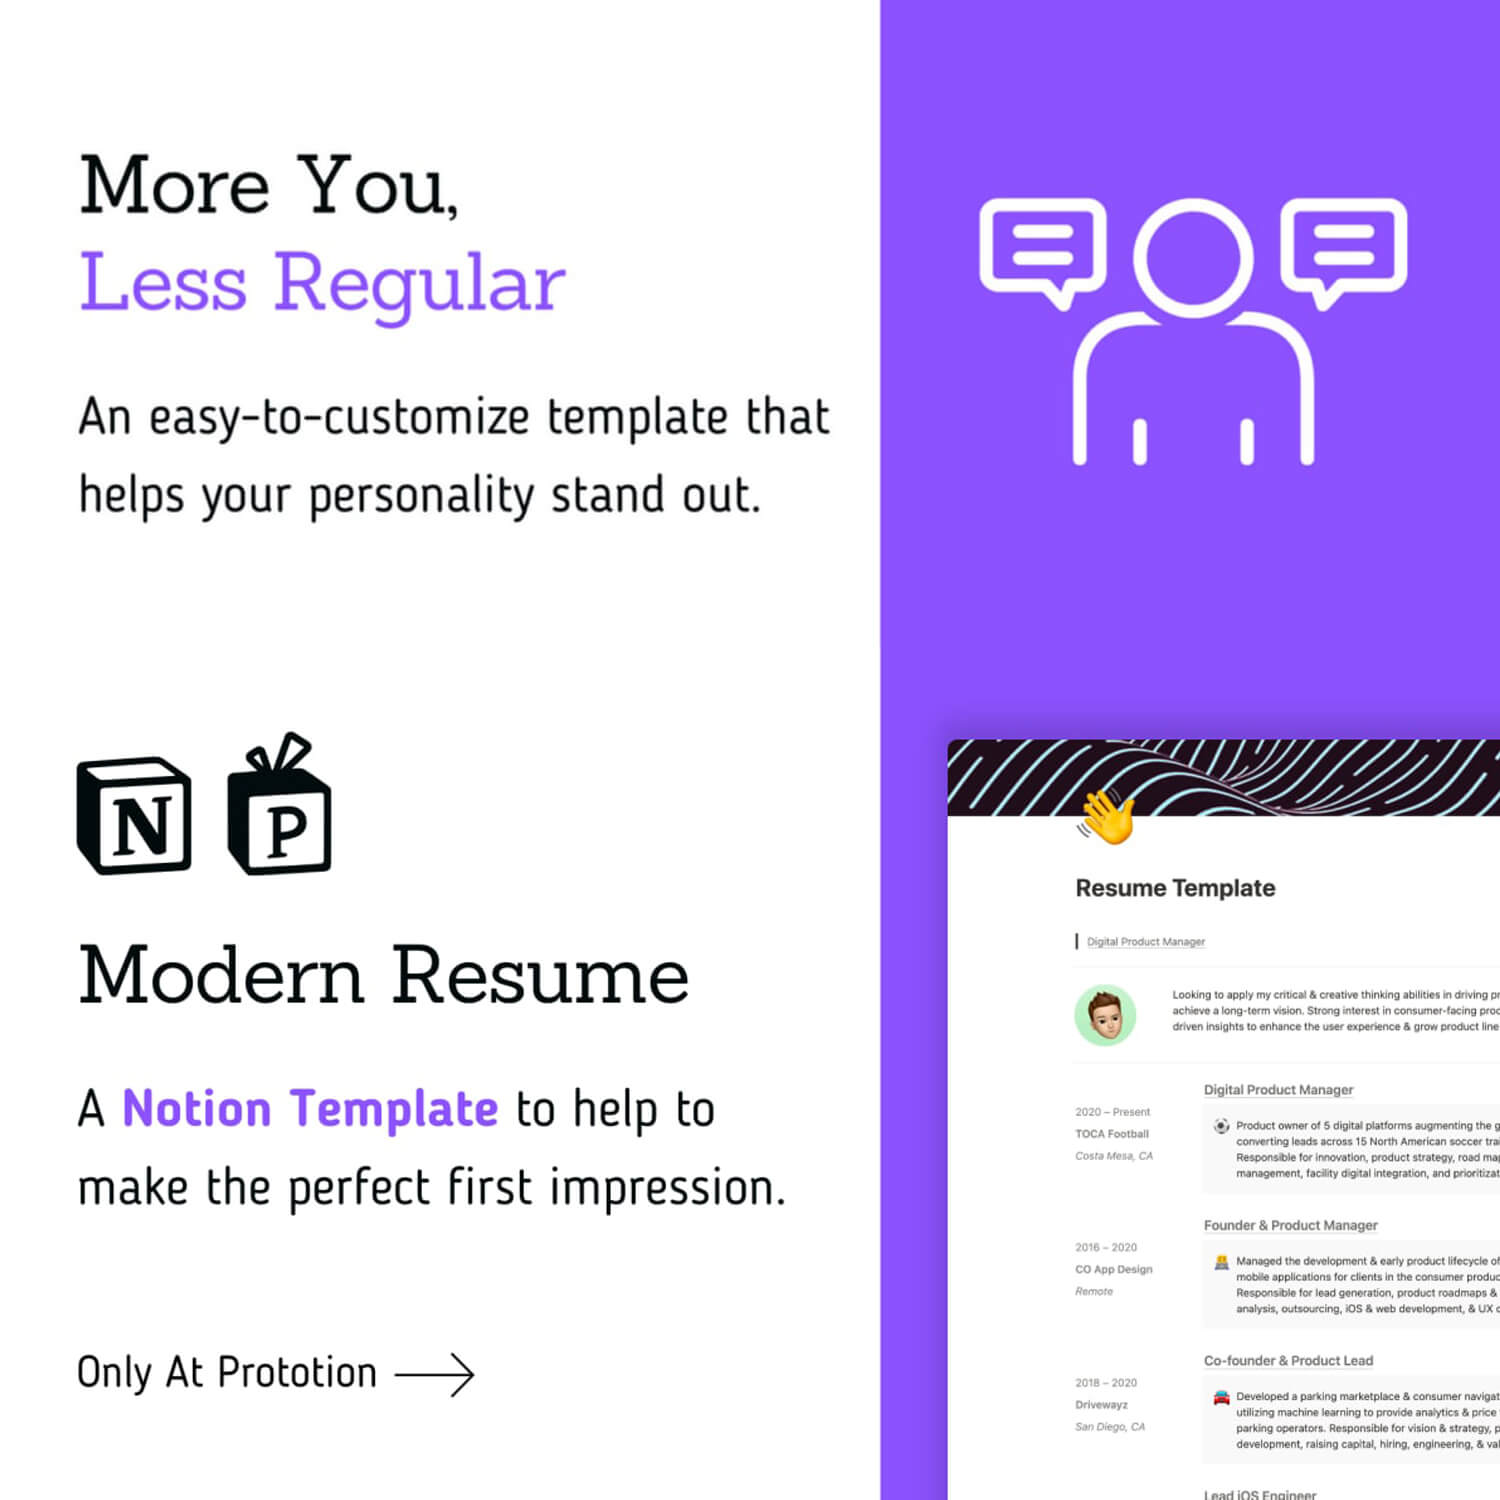 An easy-to-customize template that helps your personality stand out.